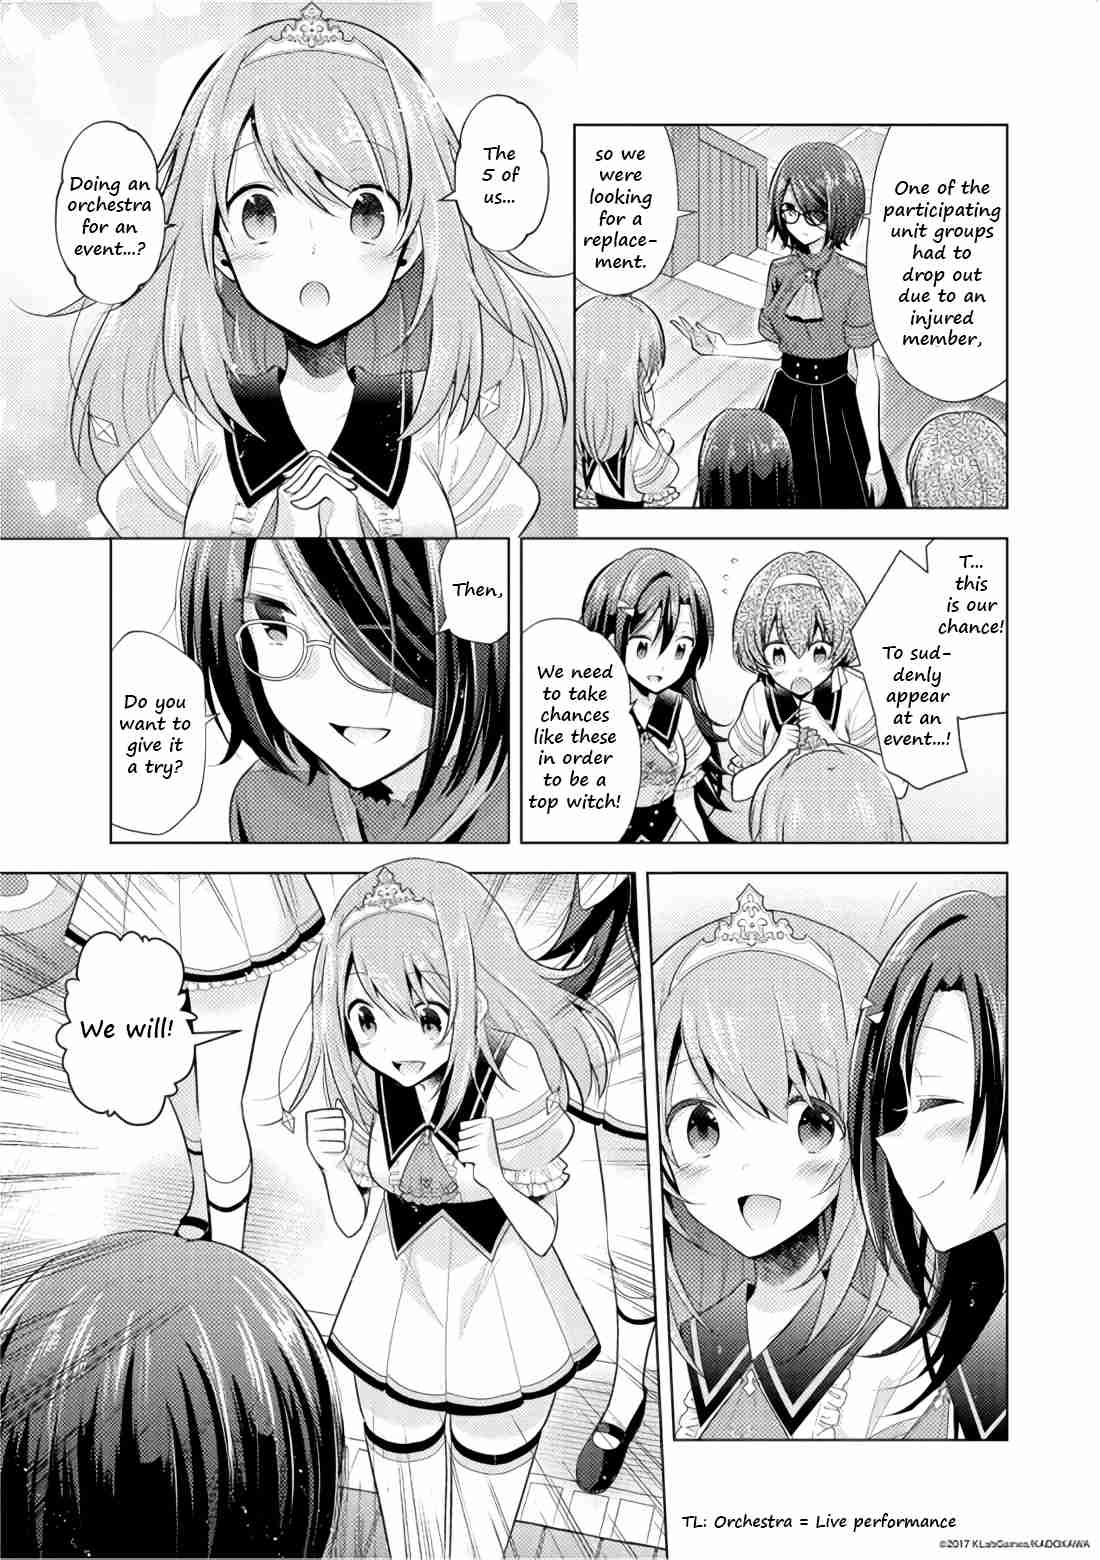 Lapis Re:LiGHTs Web Comic (Our Prelude) Vol. 1 Ch. 3 Our Prelude (LiGHTs)